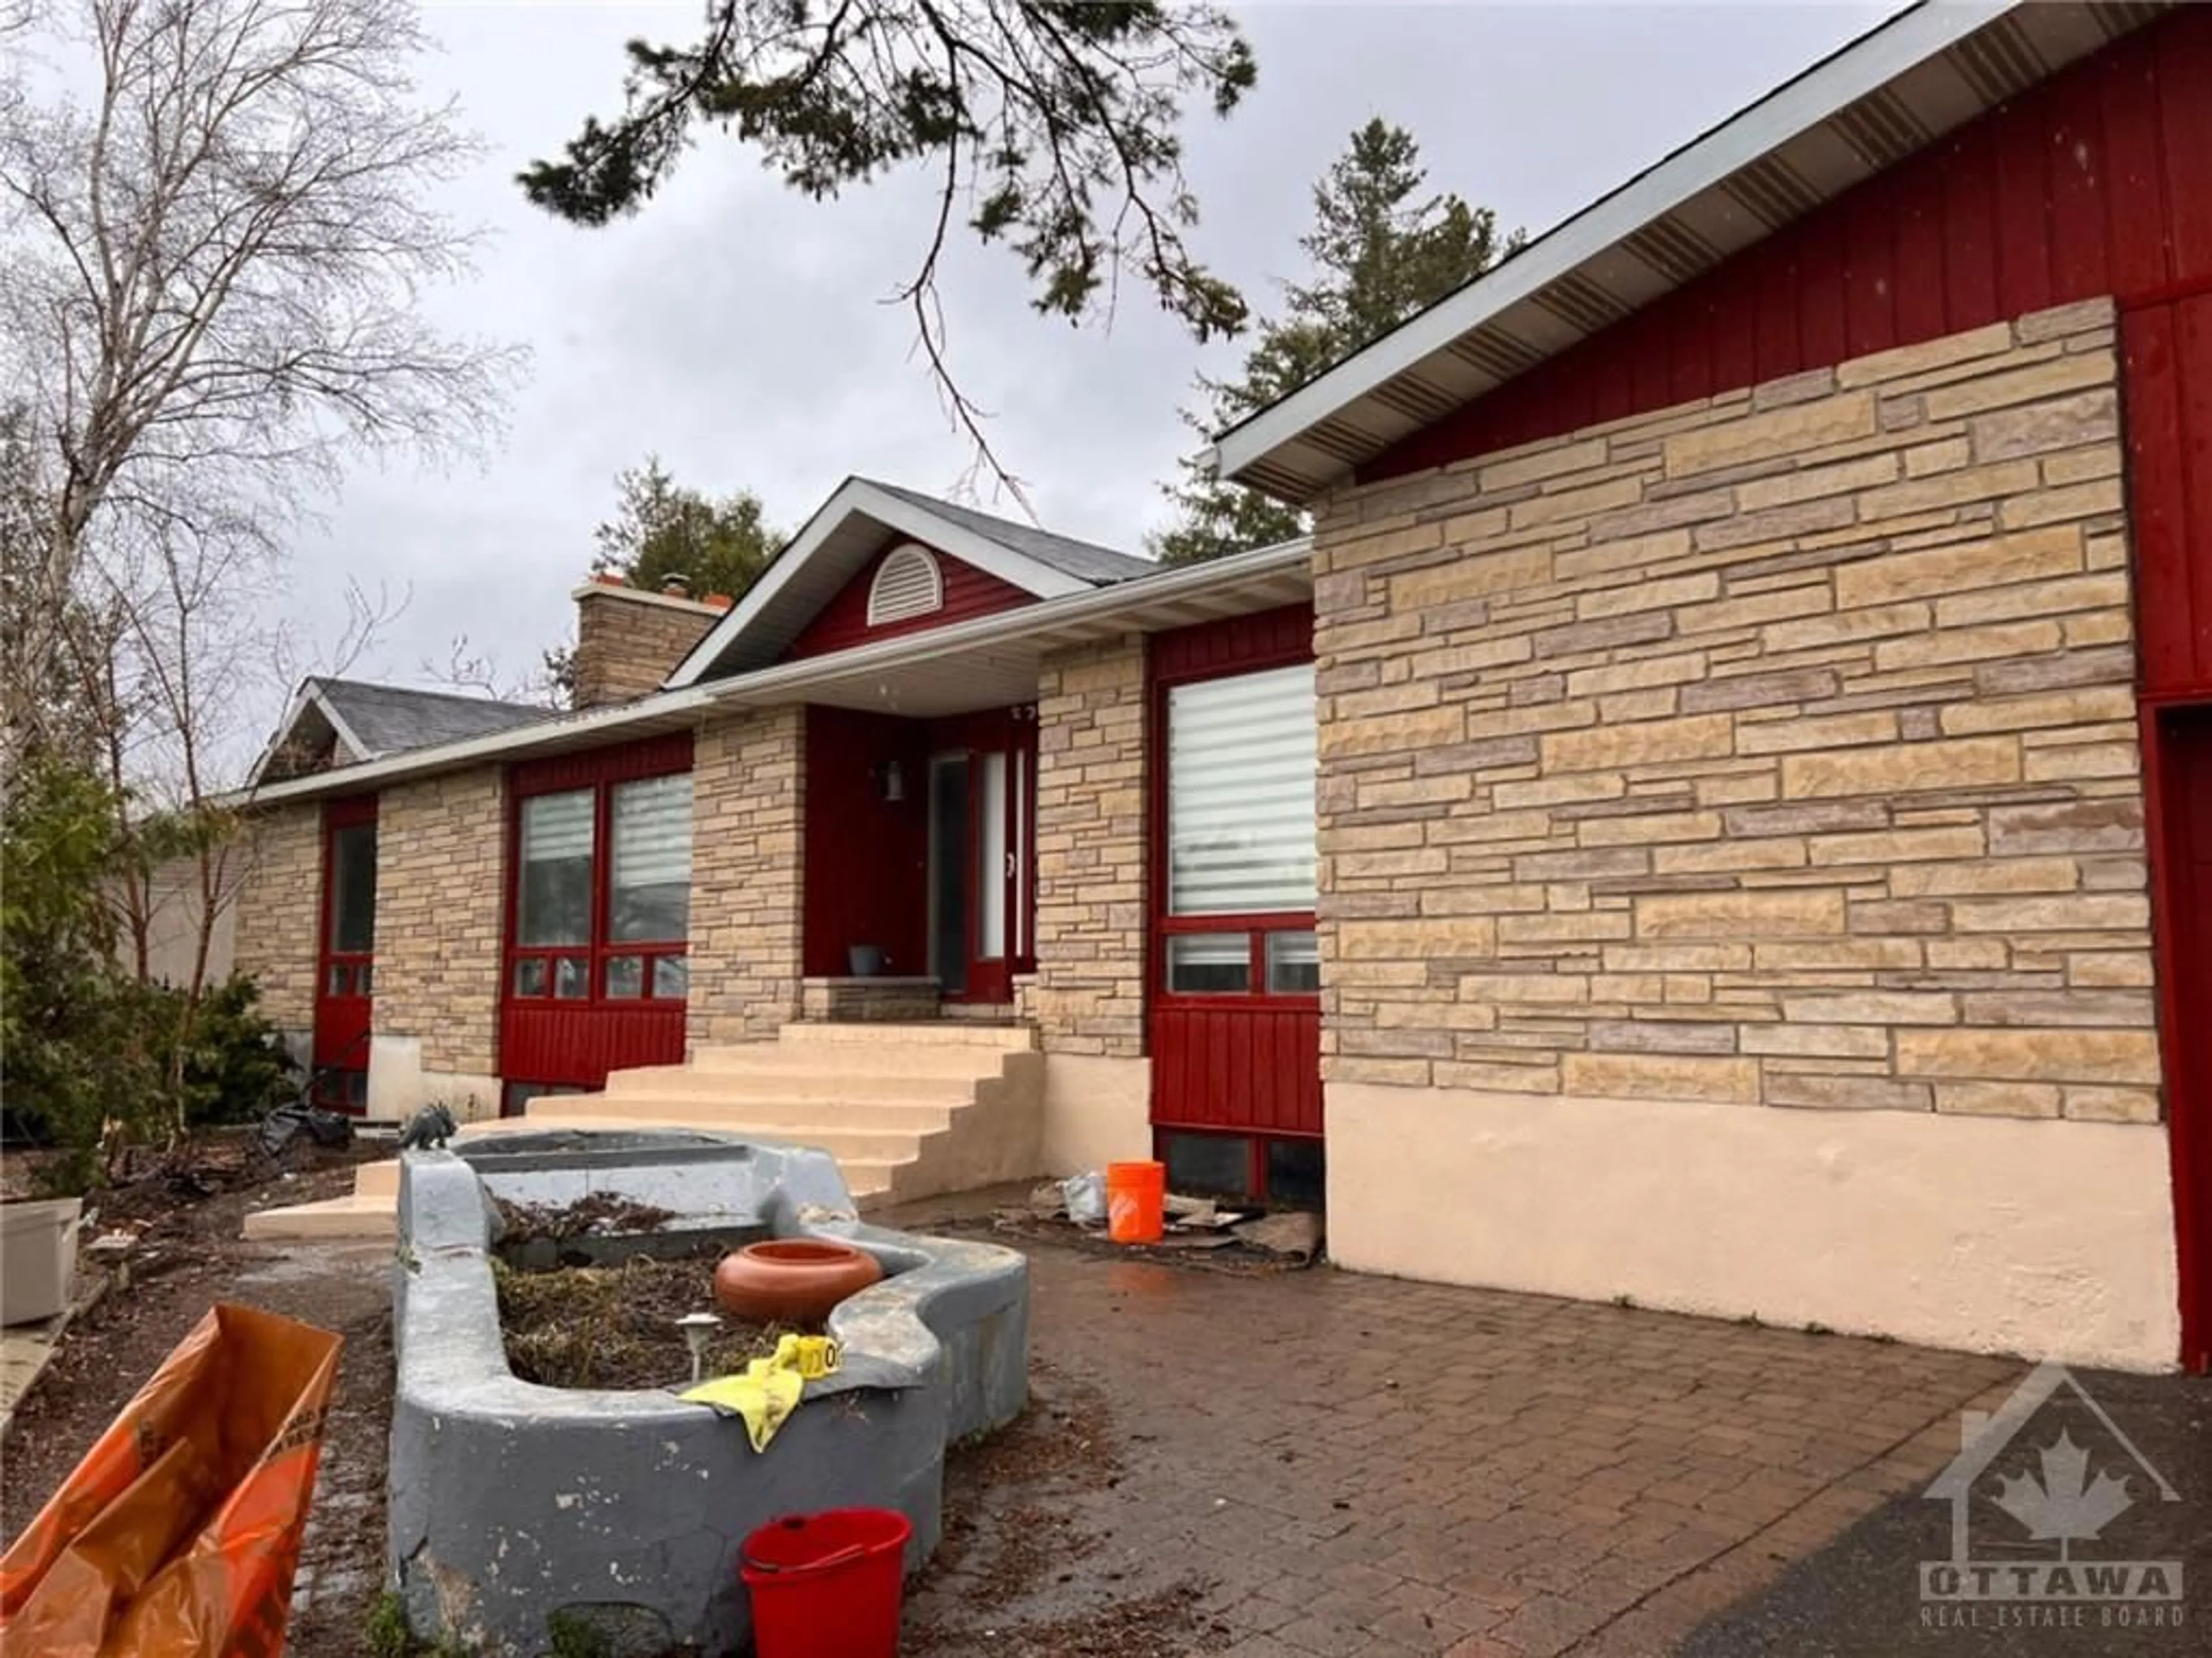 Home with brick exterior material for 3285 GREENBANK Rd, Ottawa Ontario K2J 4J1